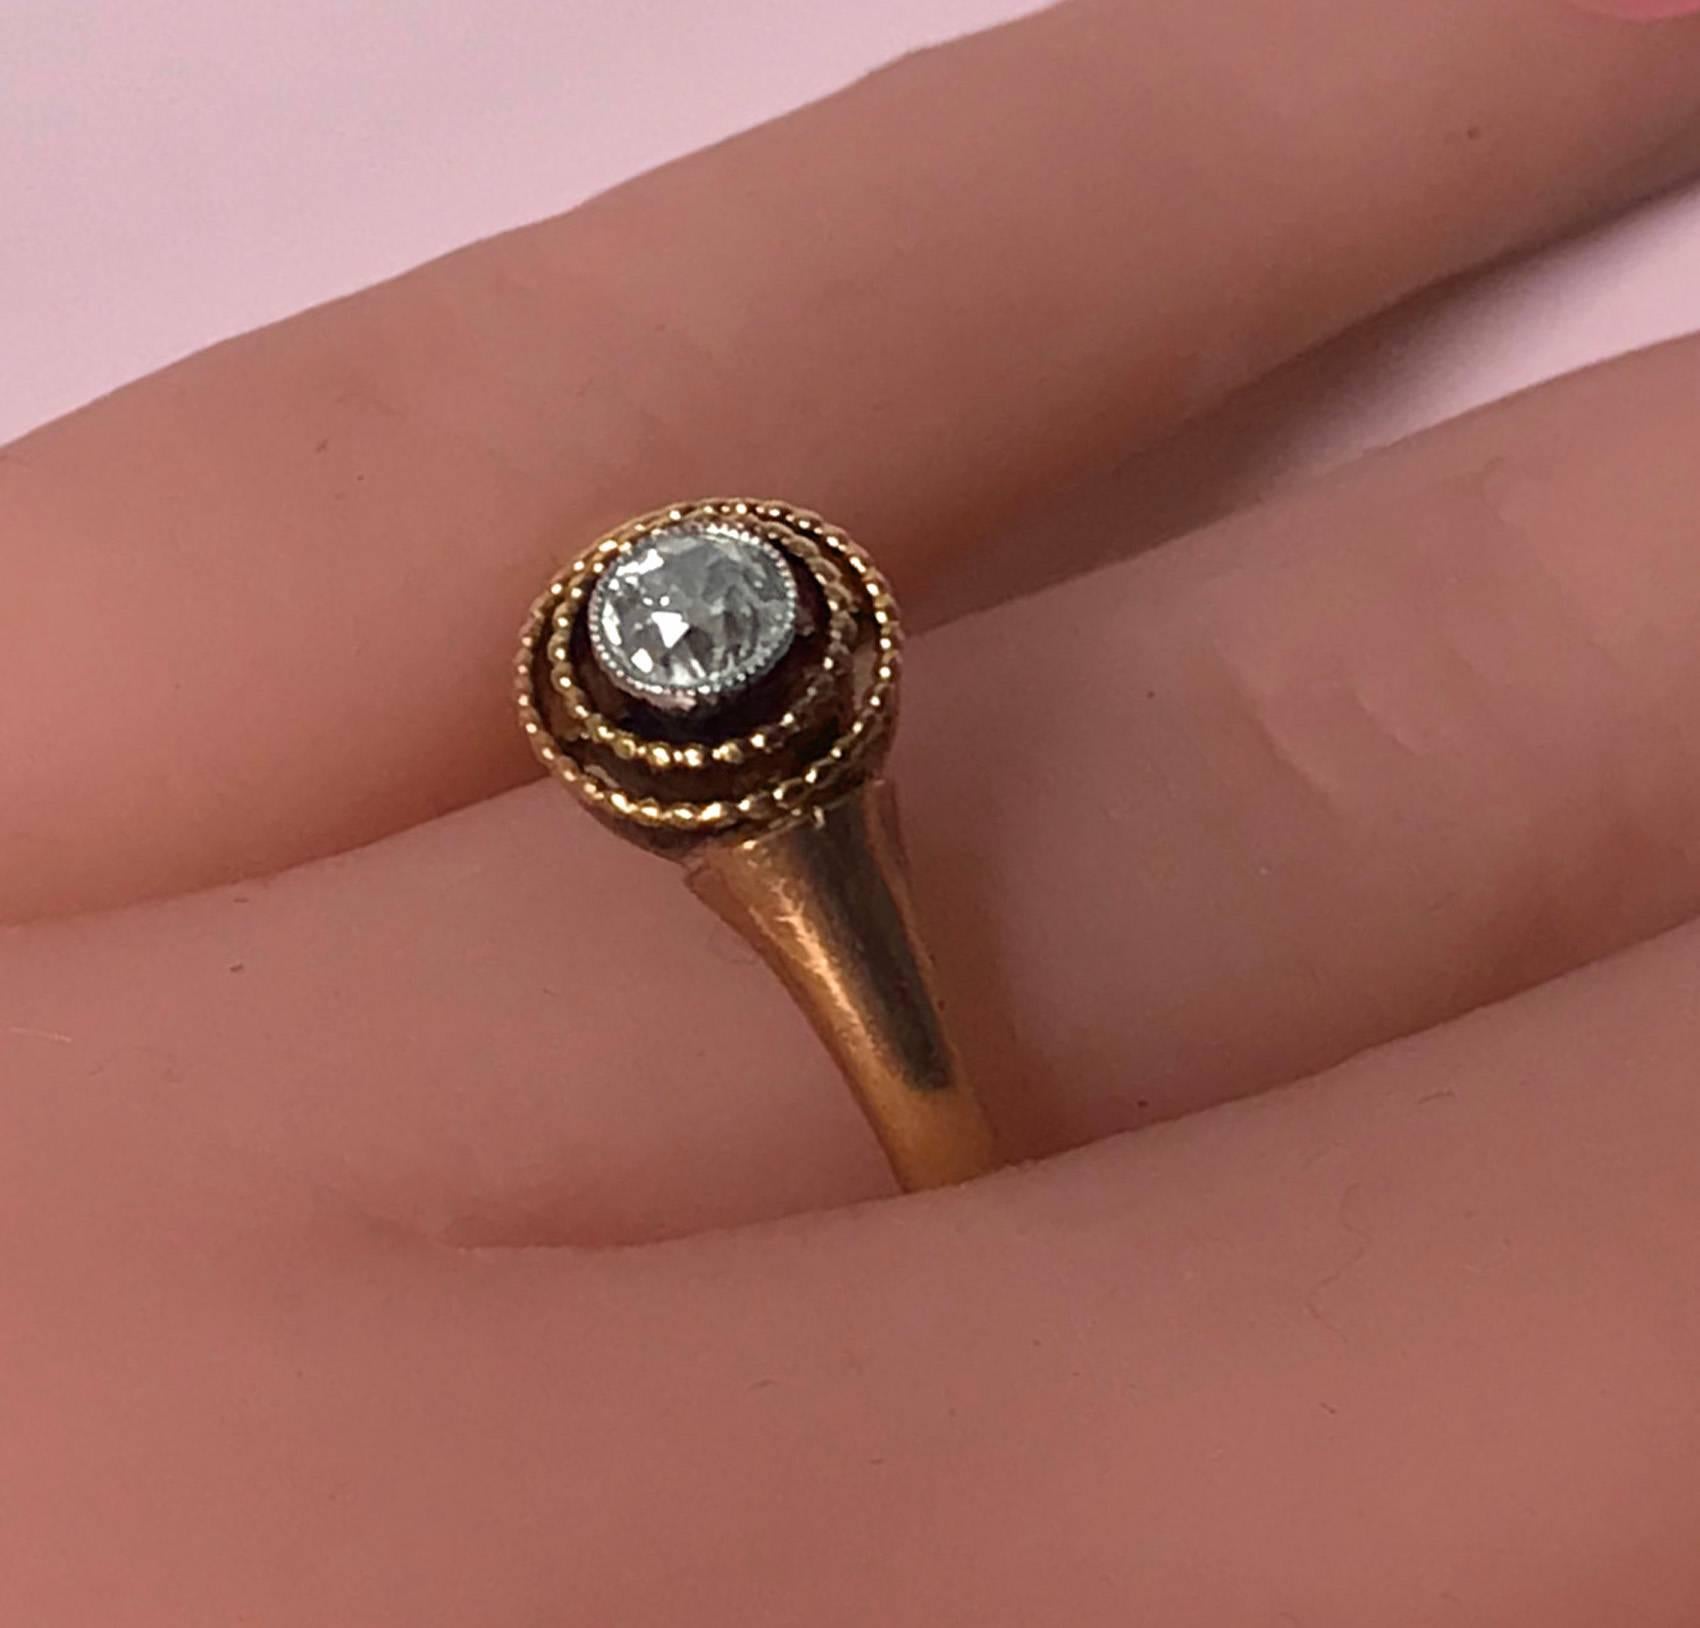 Antique Diamond Gold Ring, Continental C.1910. The 14K Ring milligrain set with an old mine cut diamond, approximately 0.30 ct, approximately VS2-SI1 clarity, I-J colour, open double bead concentric border surround, plain shank. Total Item Weight: